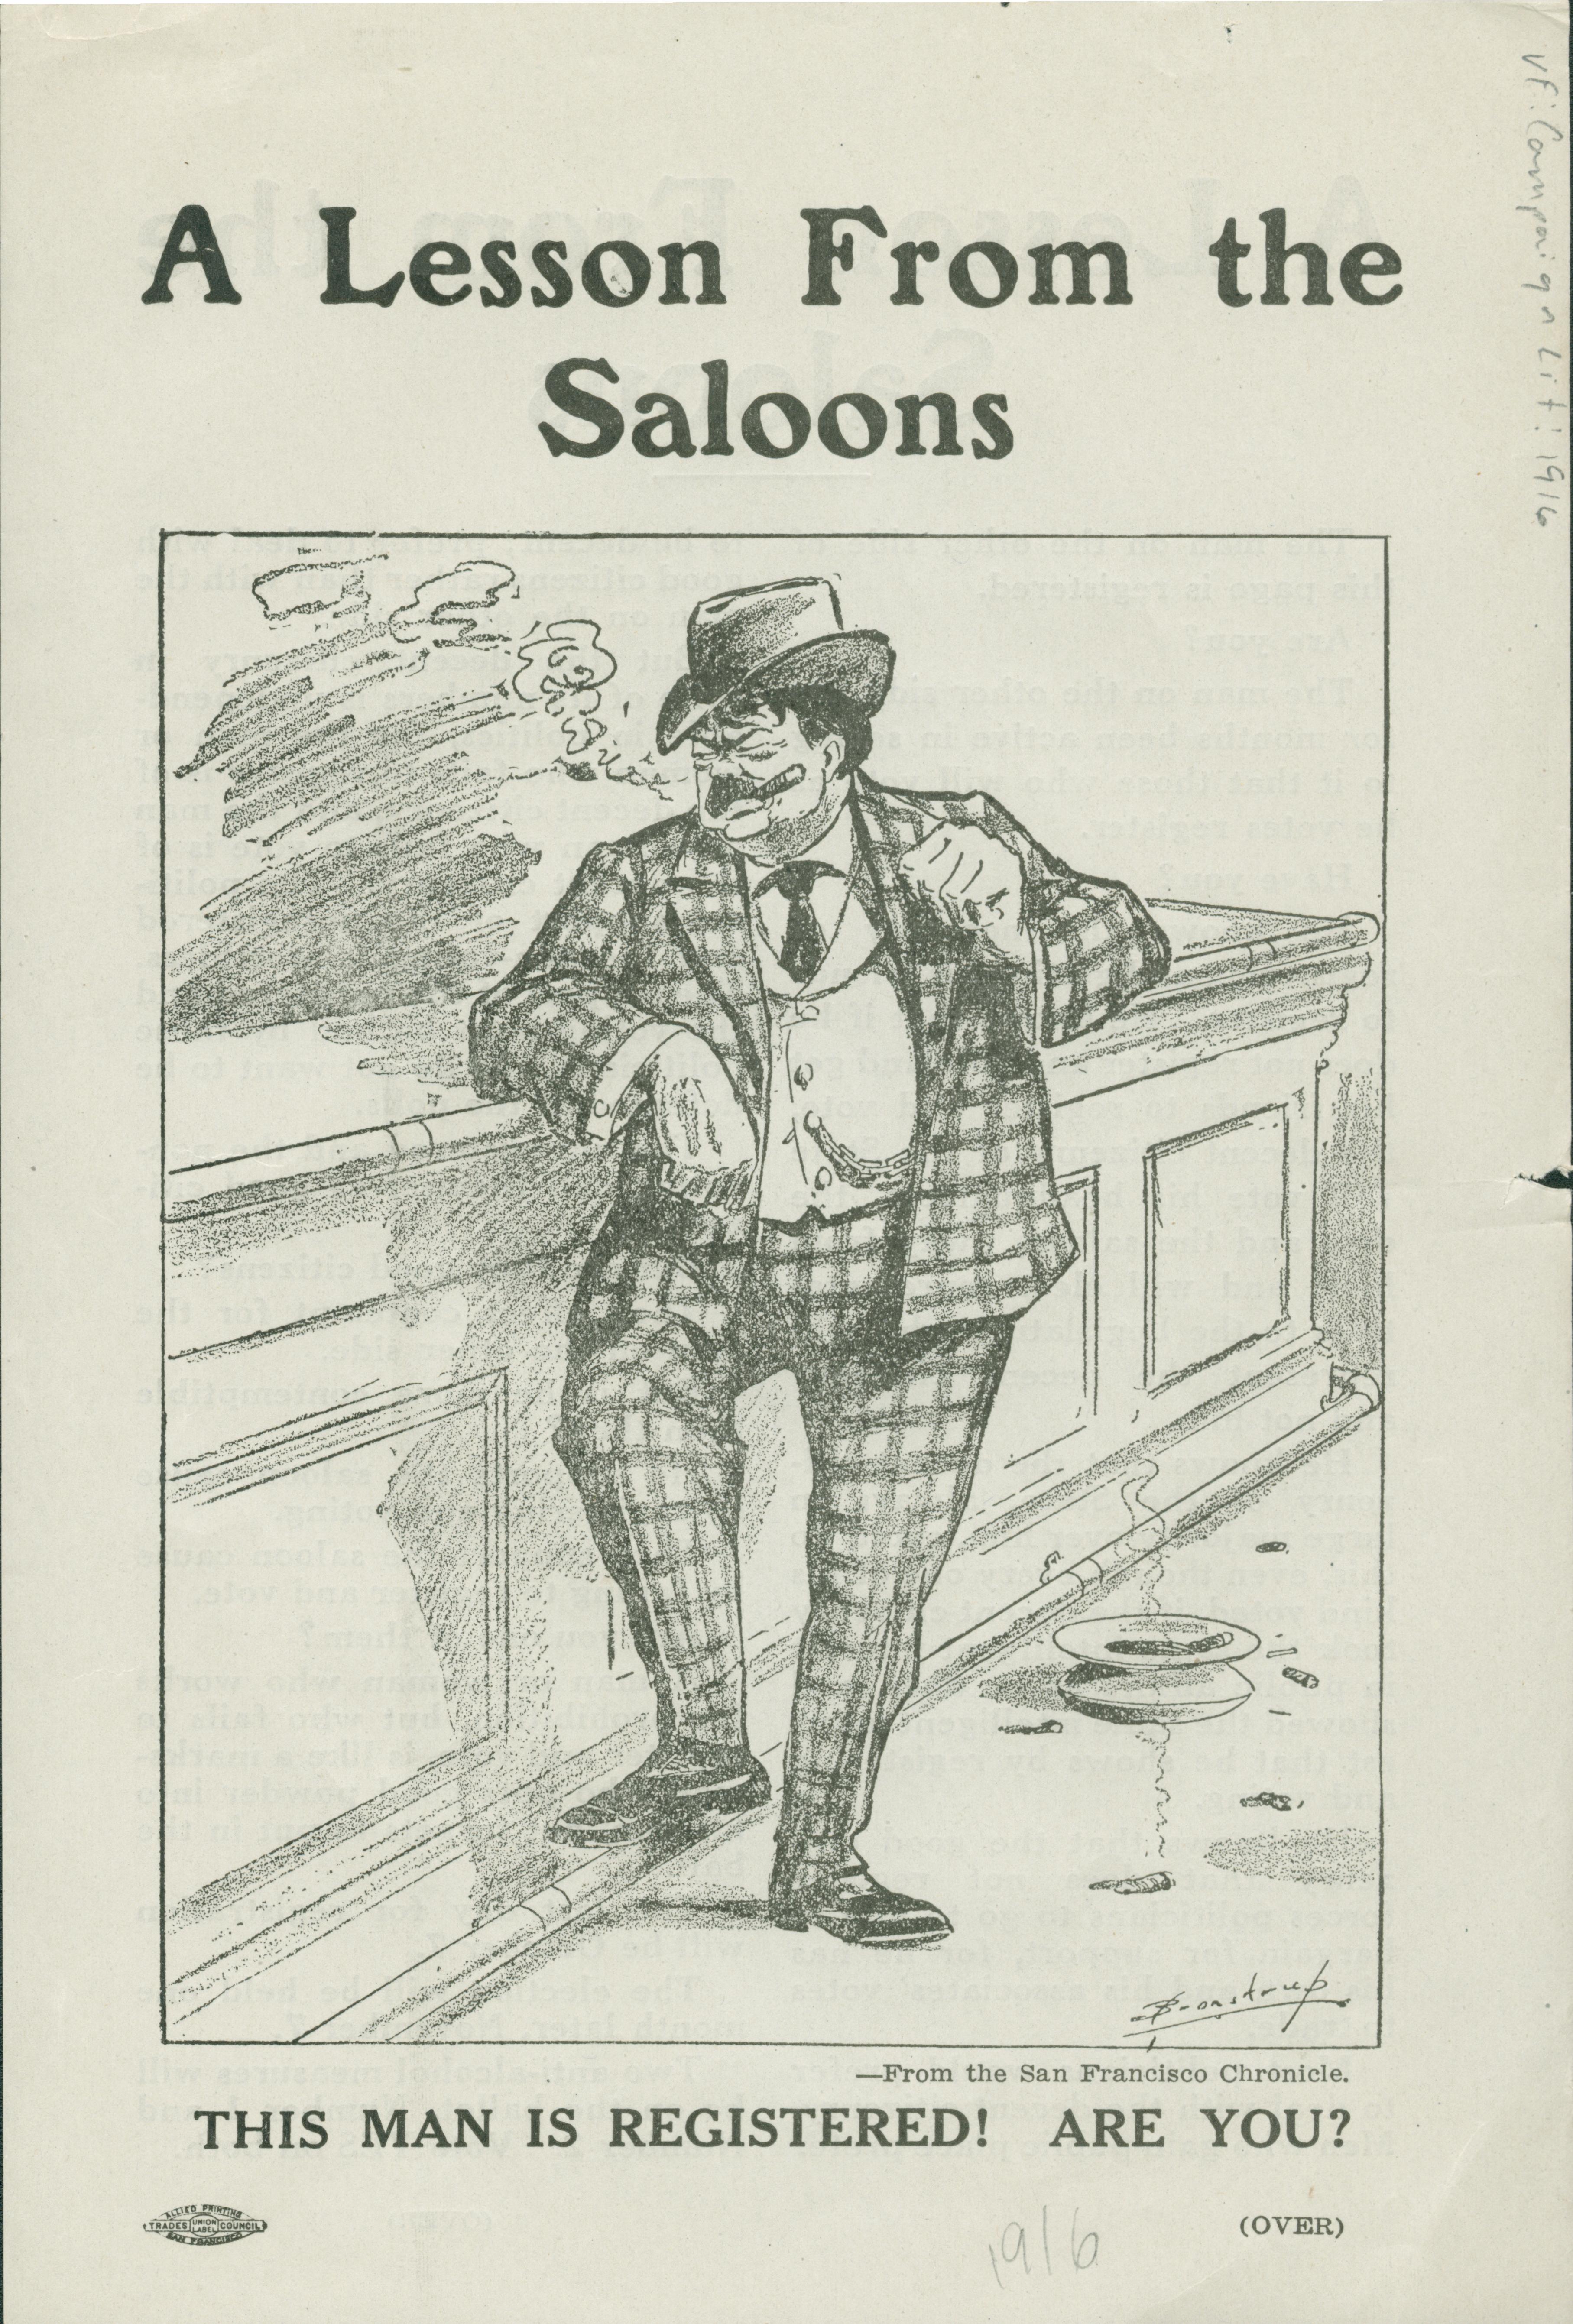 The front side of this broadside shows a cartoon of a man in a saloon from the San Francisco Chronicle and urges the viewer to register